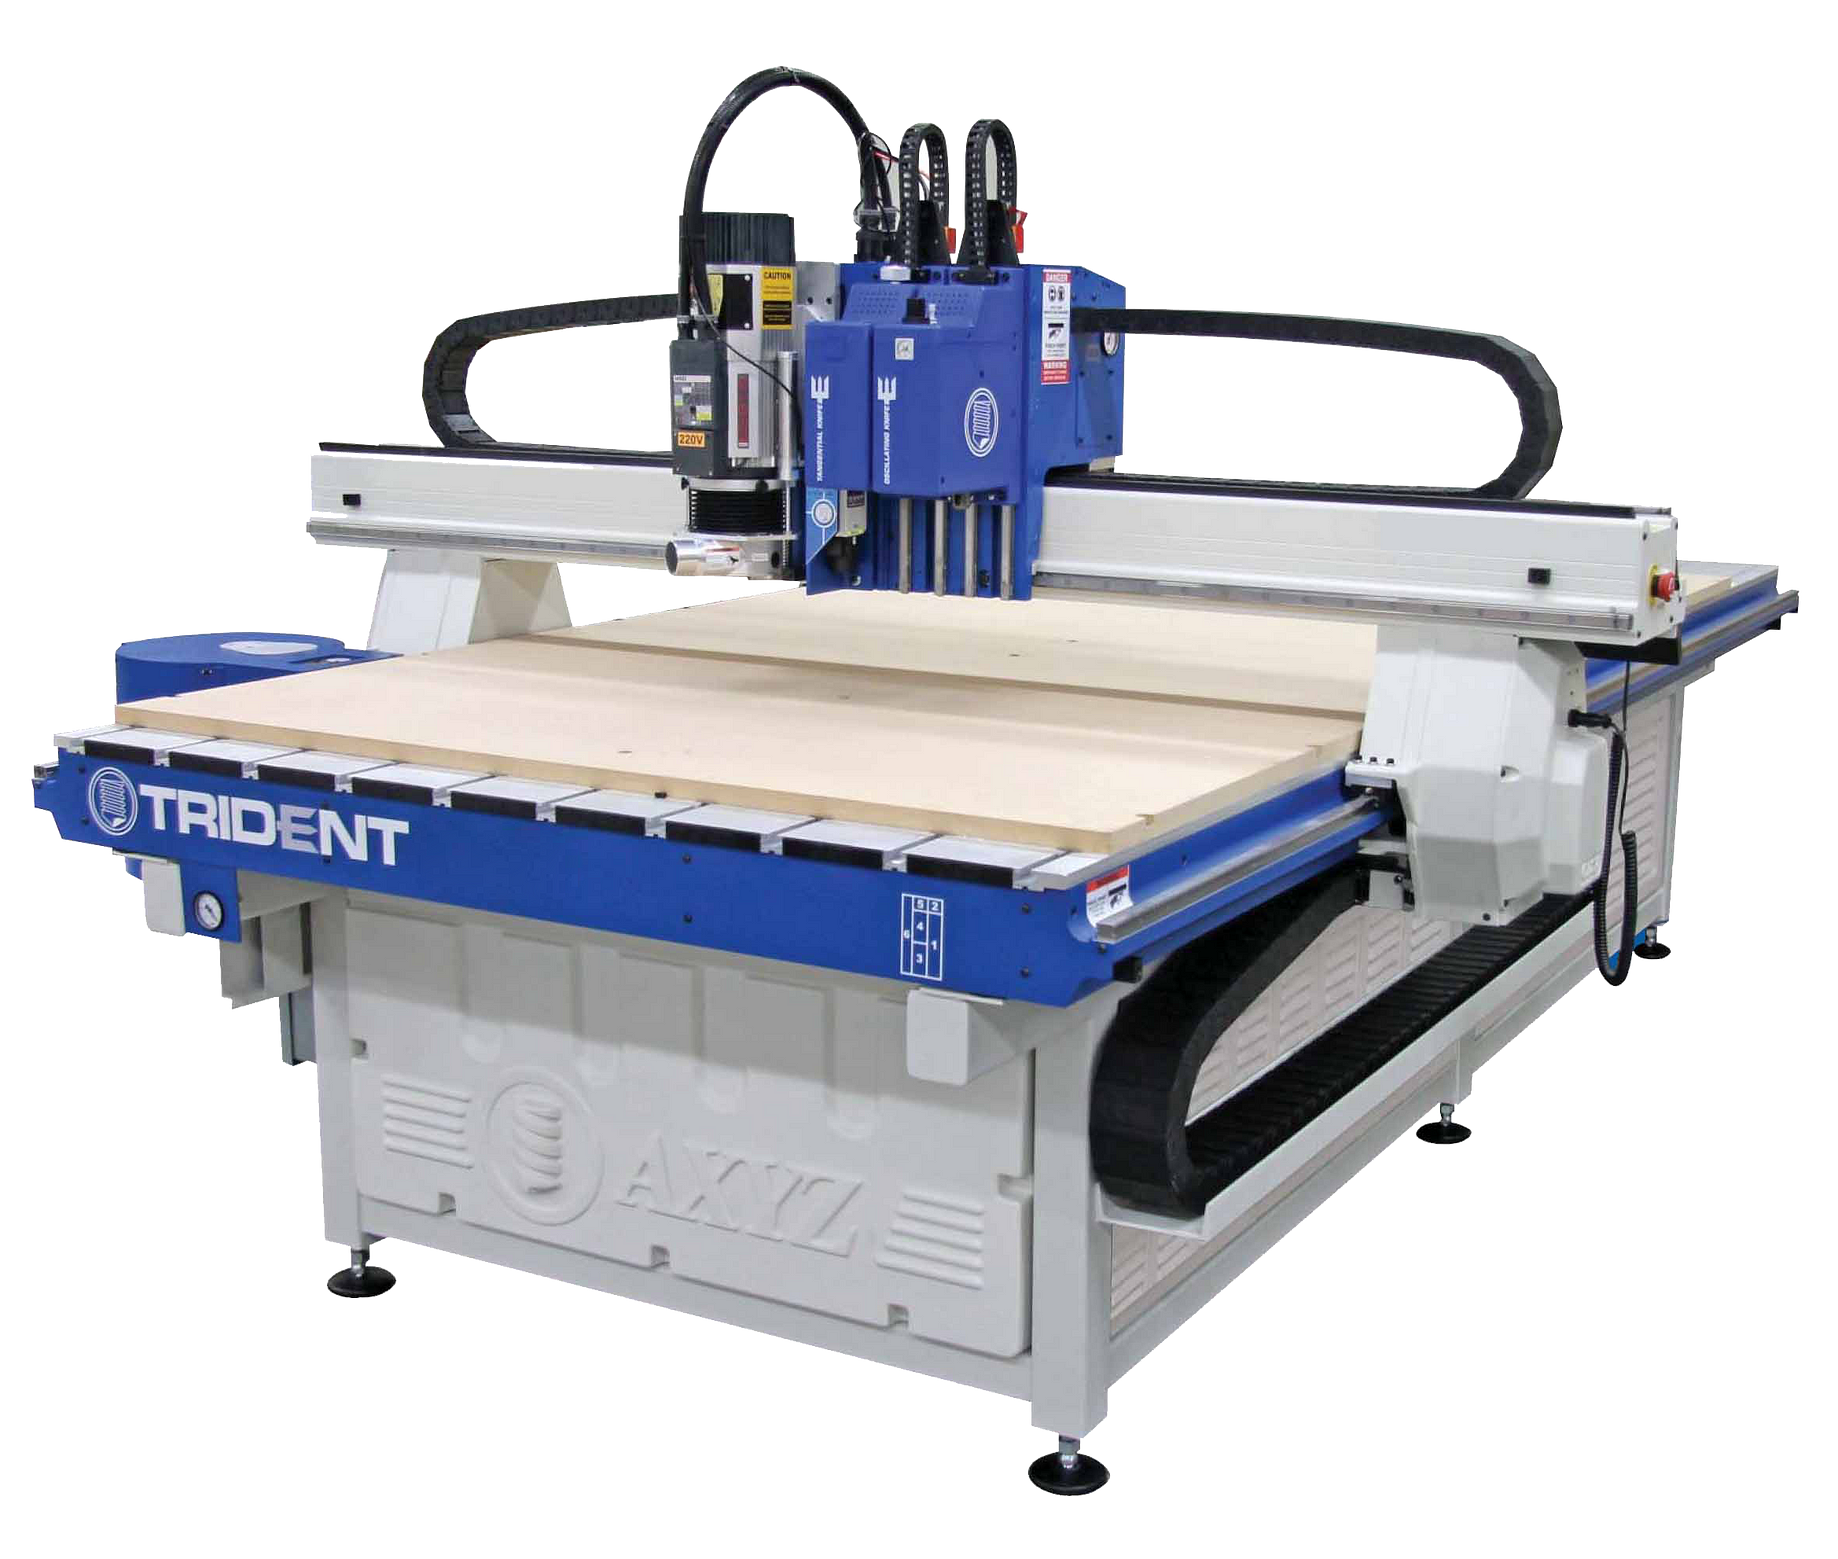 The marvellous Multicam Trident Series 3000 CNC router | by FAB9 | Medium